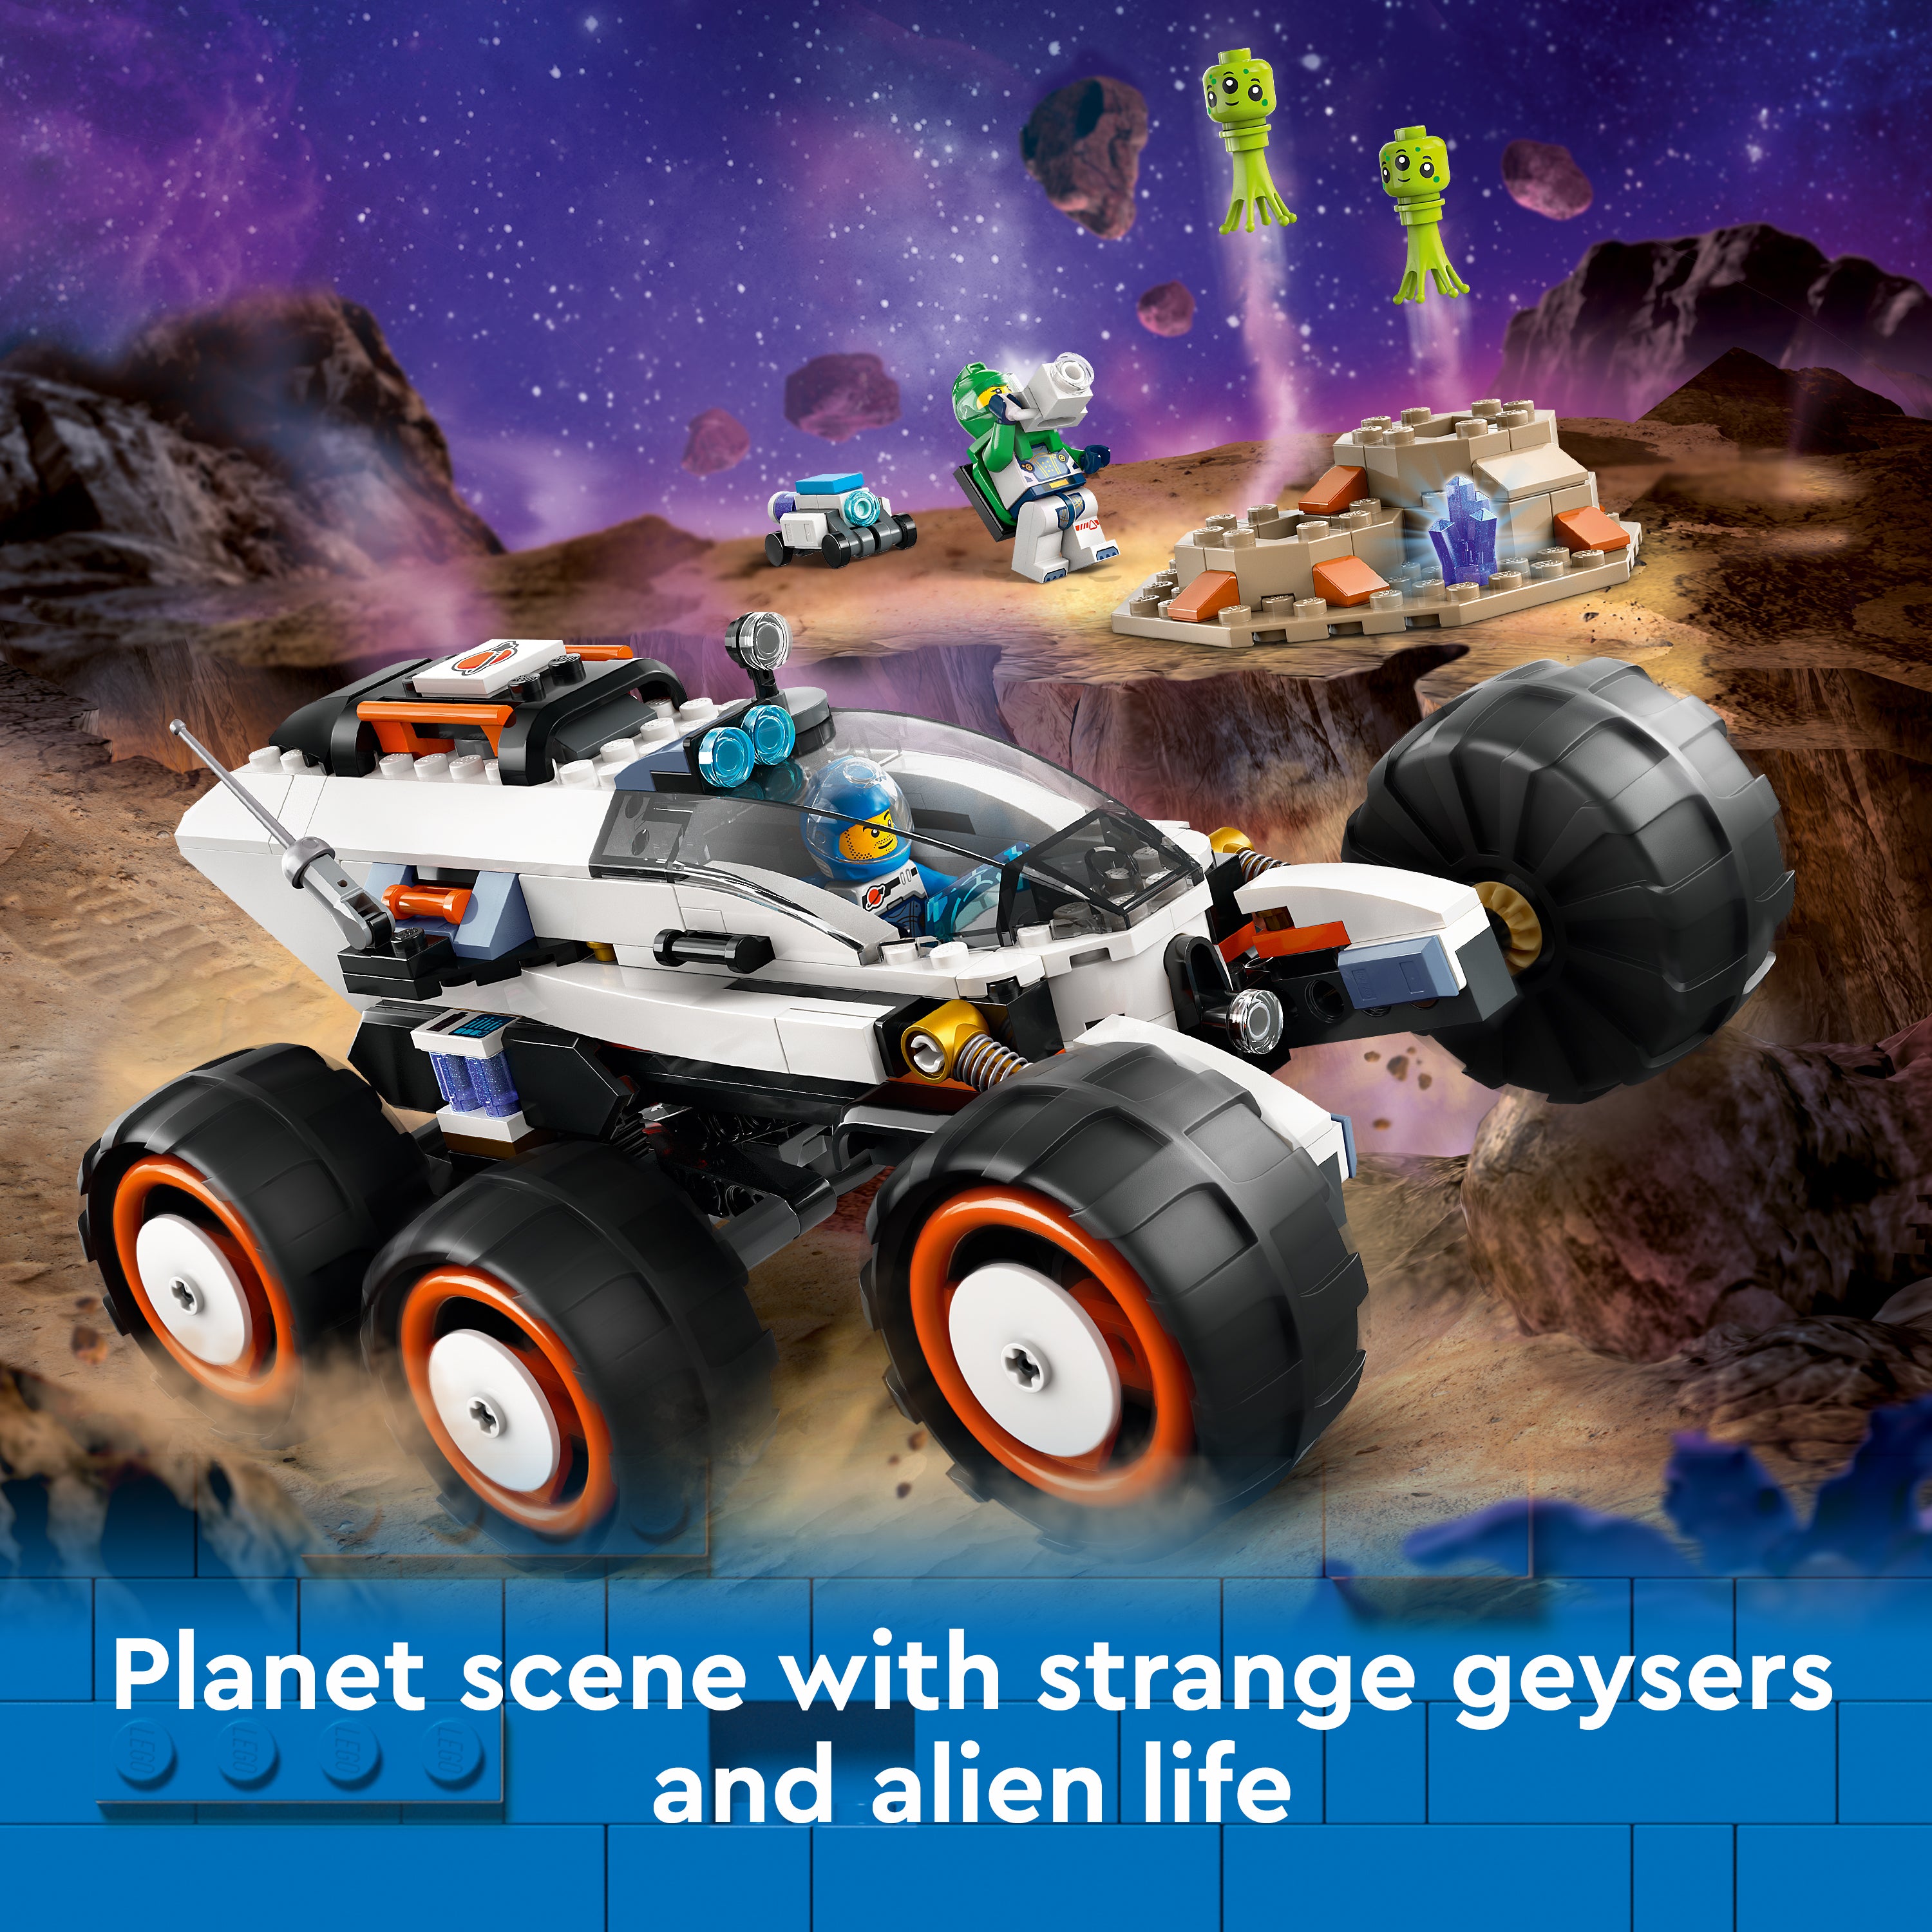 Lego 60431 Space Explorer Rover and Alien Life